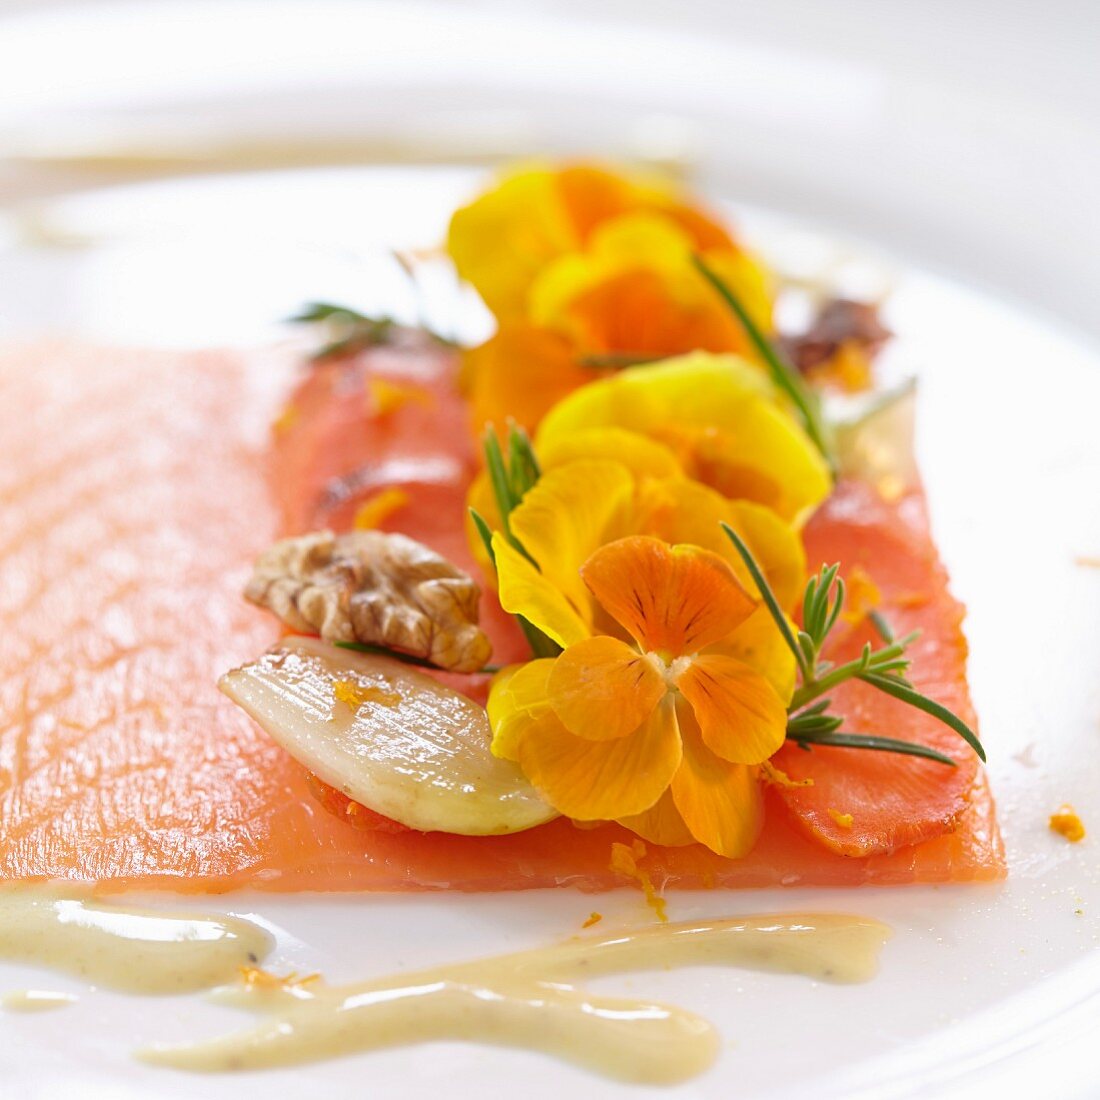 Smoked salmon with walnuts, shallots and yellow edible flowers